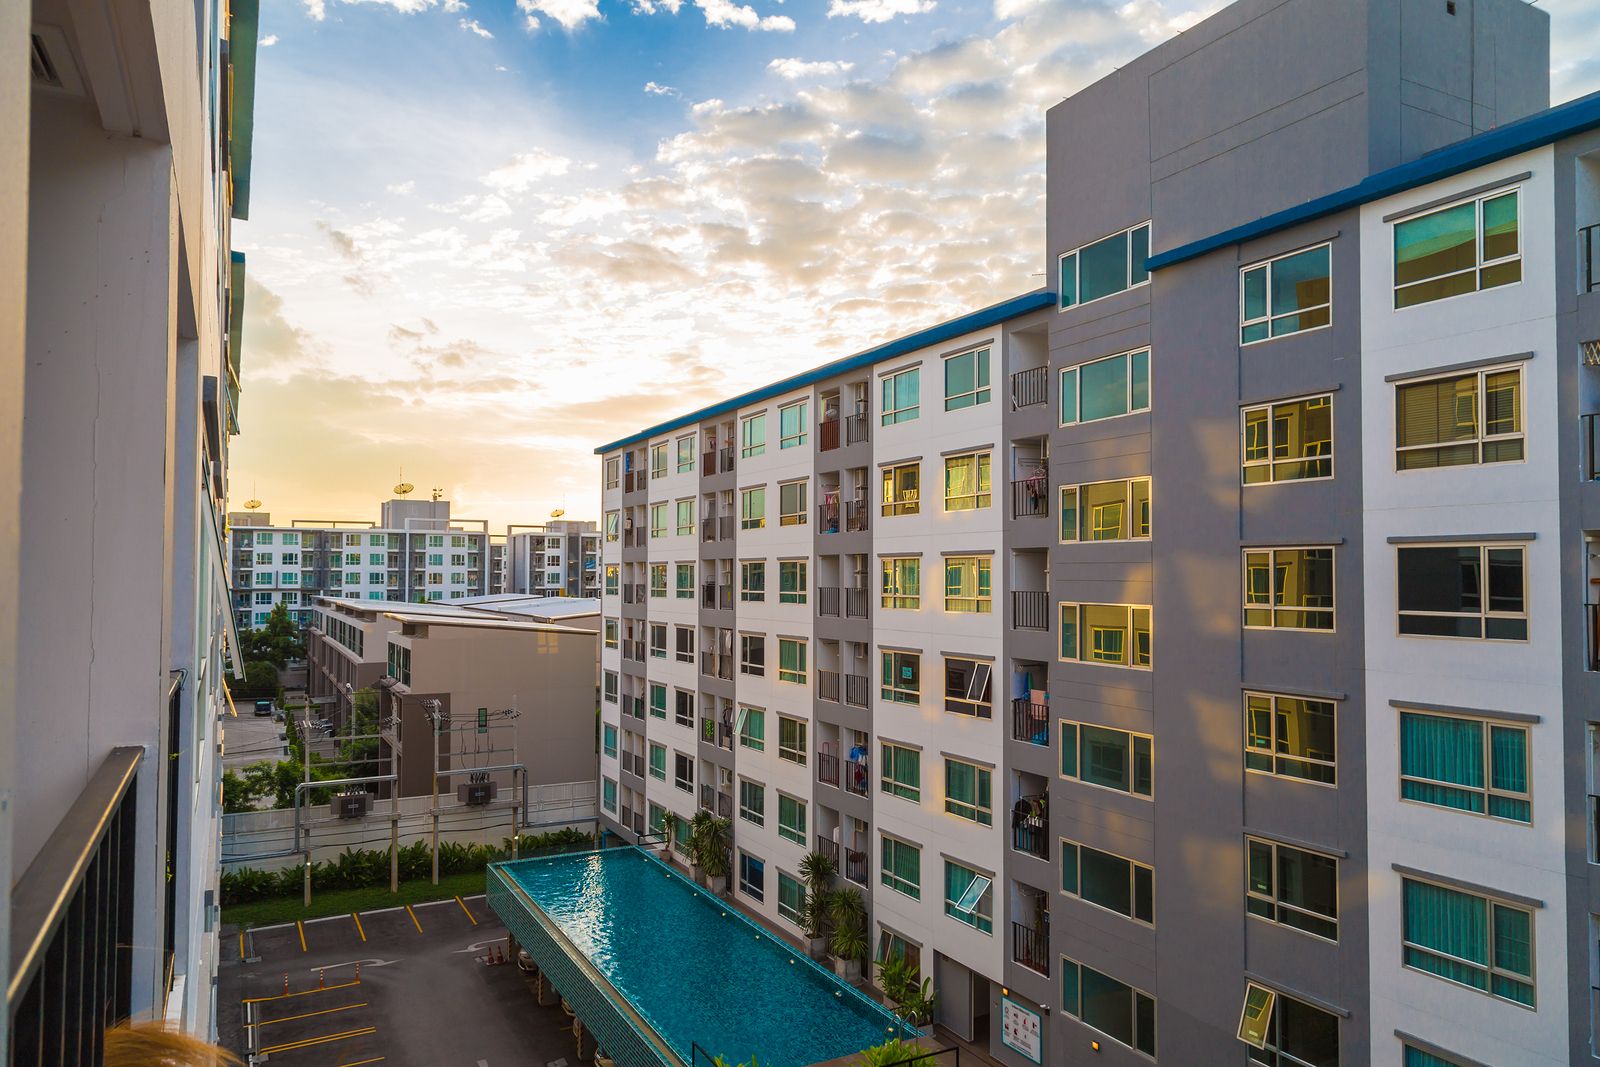 Importance Lessons Learned From Investing In Multifamily Units